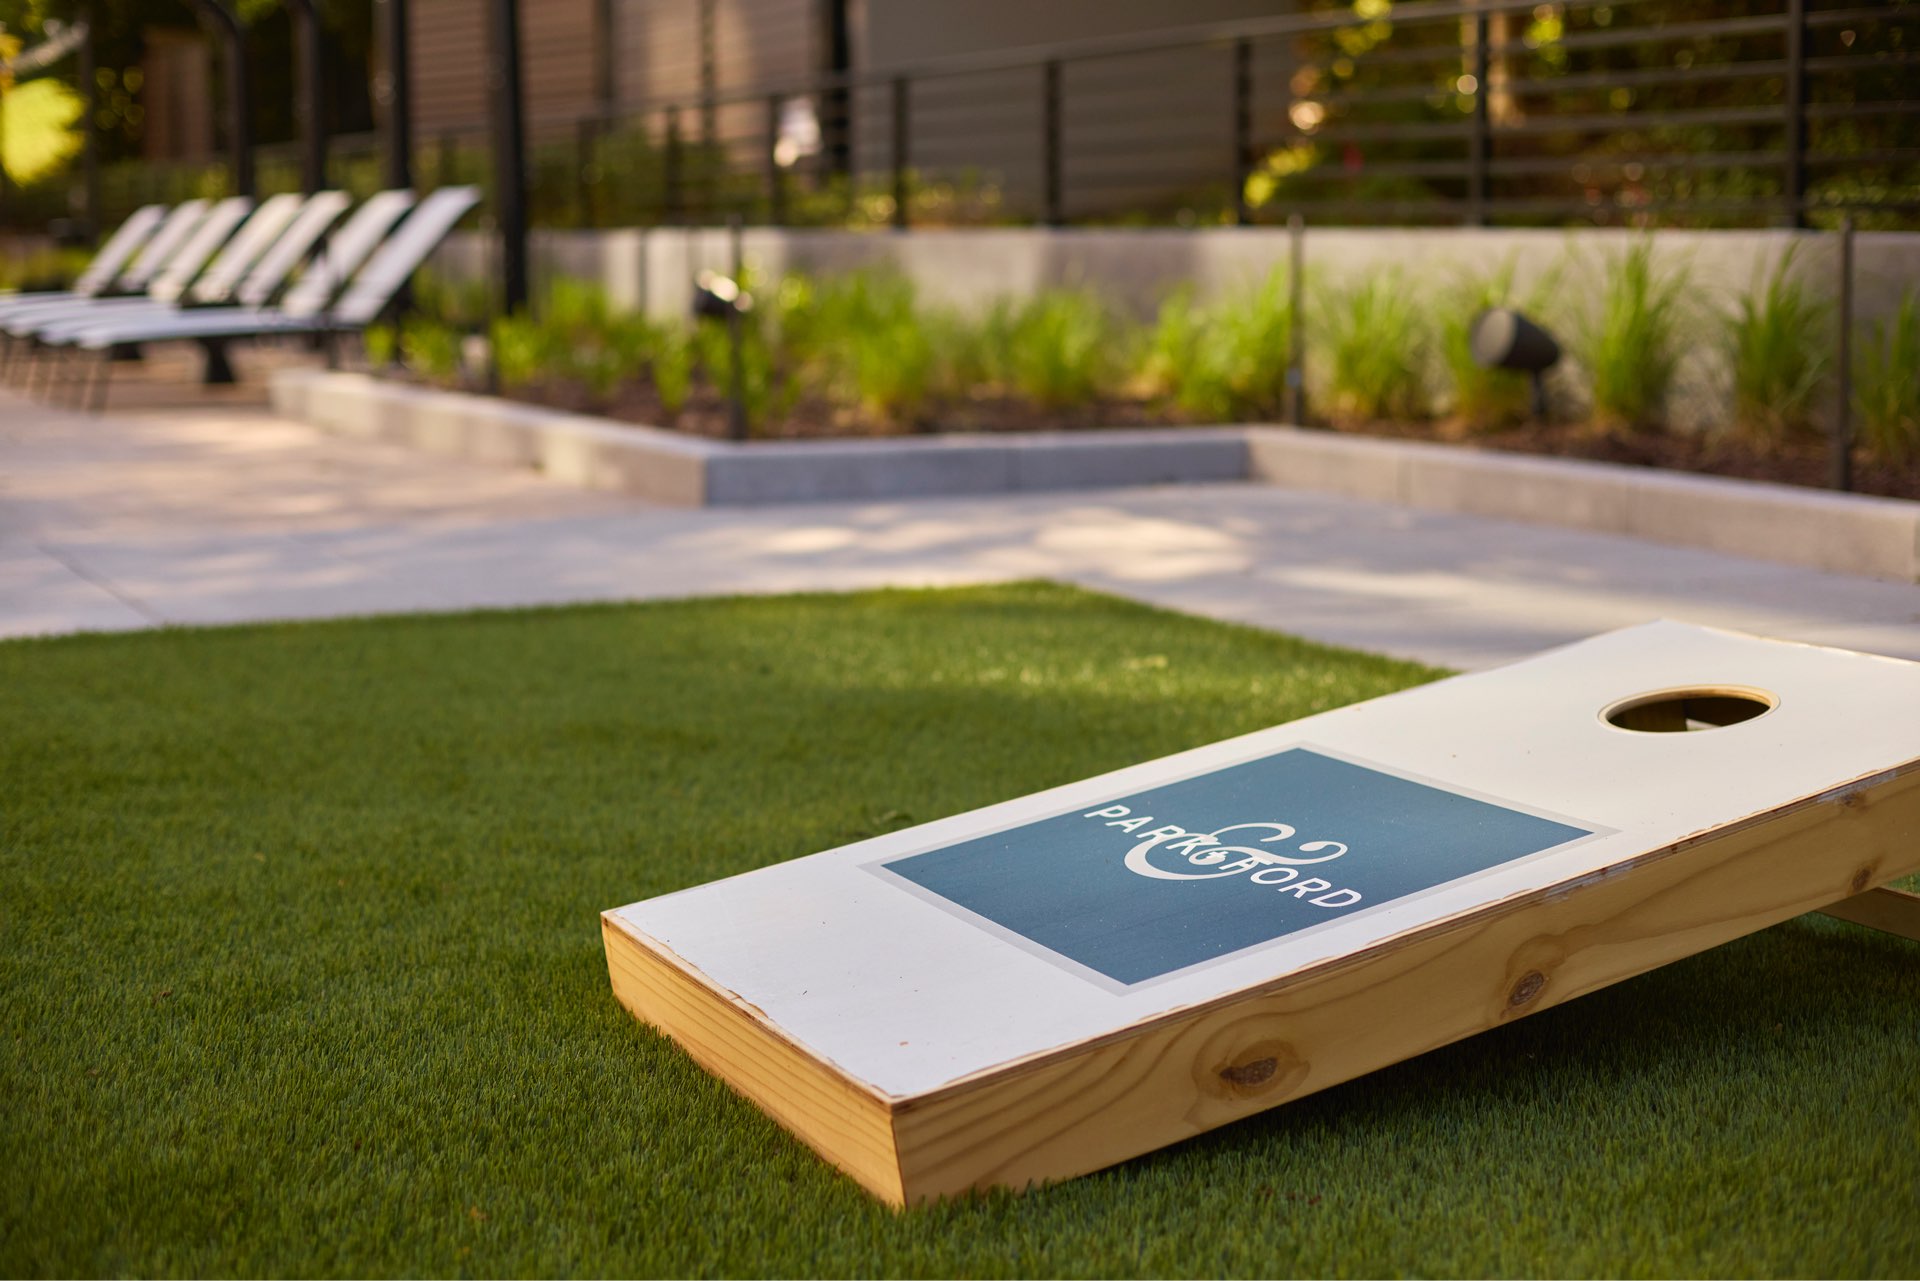 Strike up some friendly competition with a community cornhole game